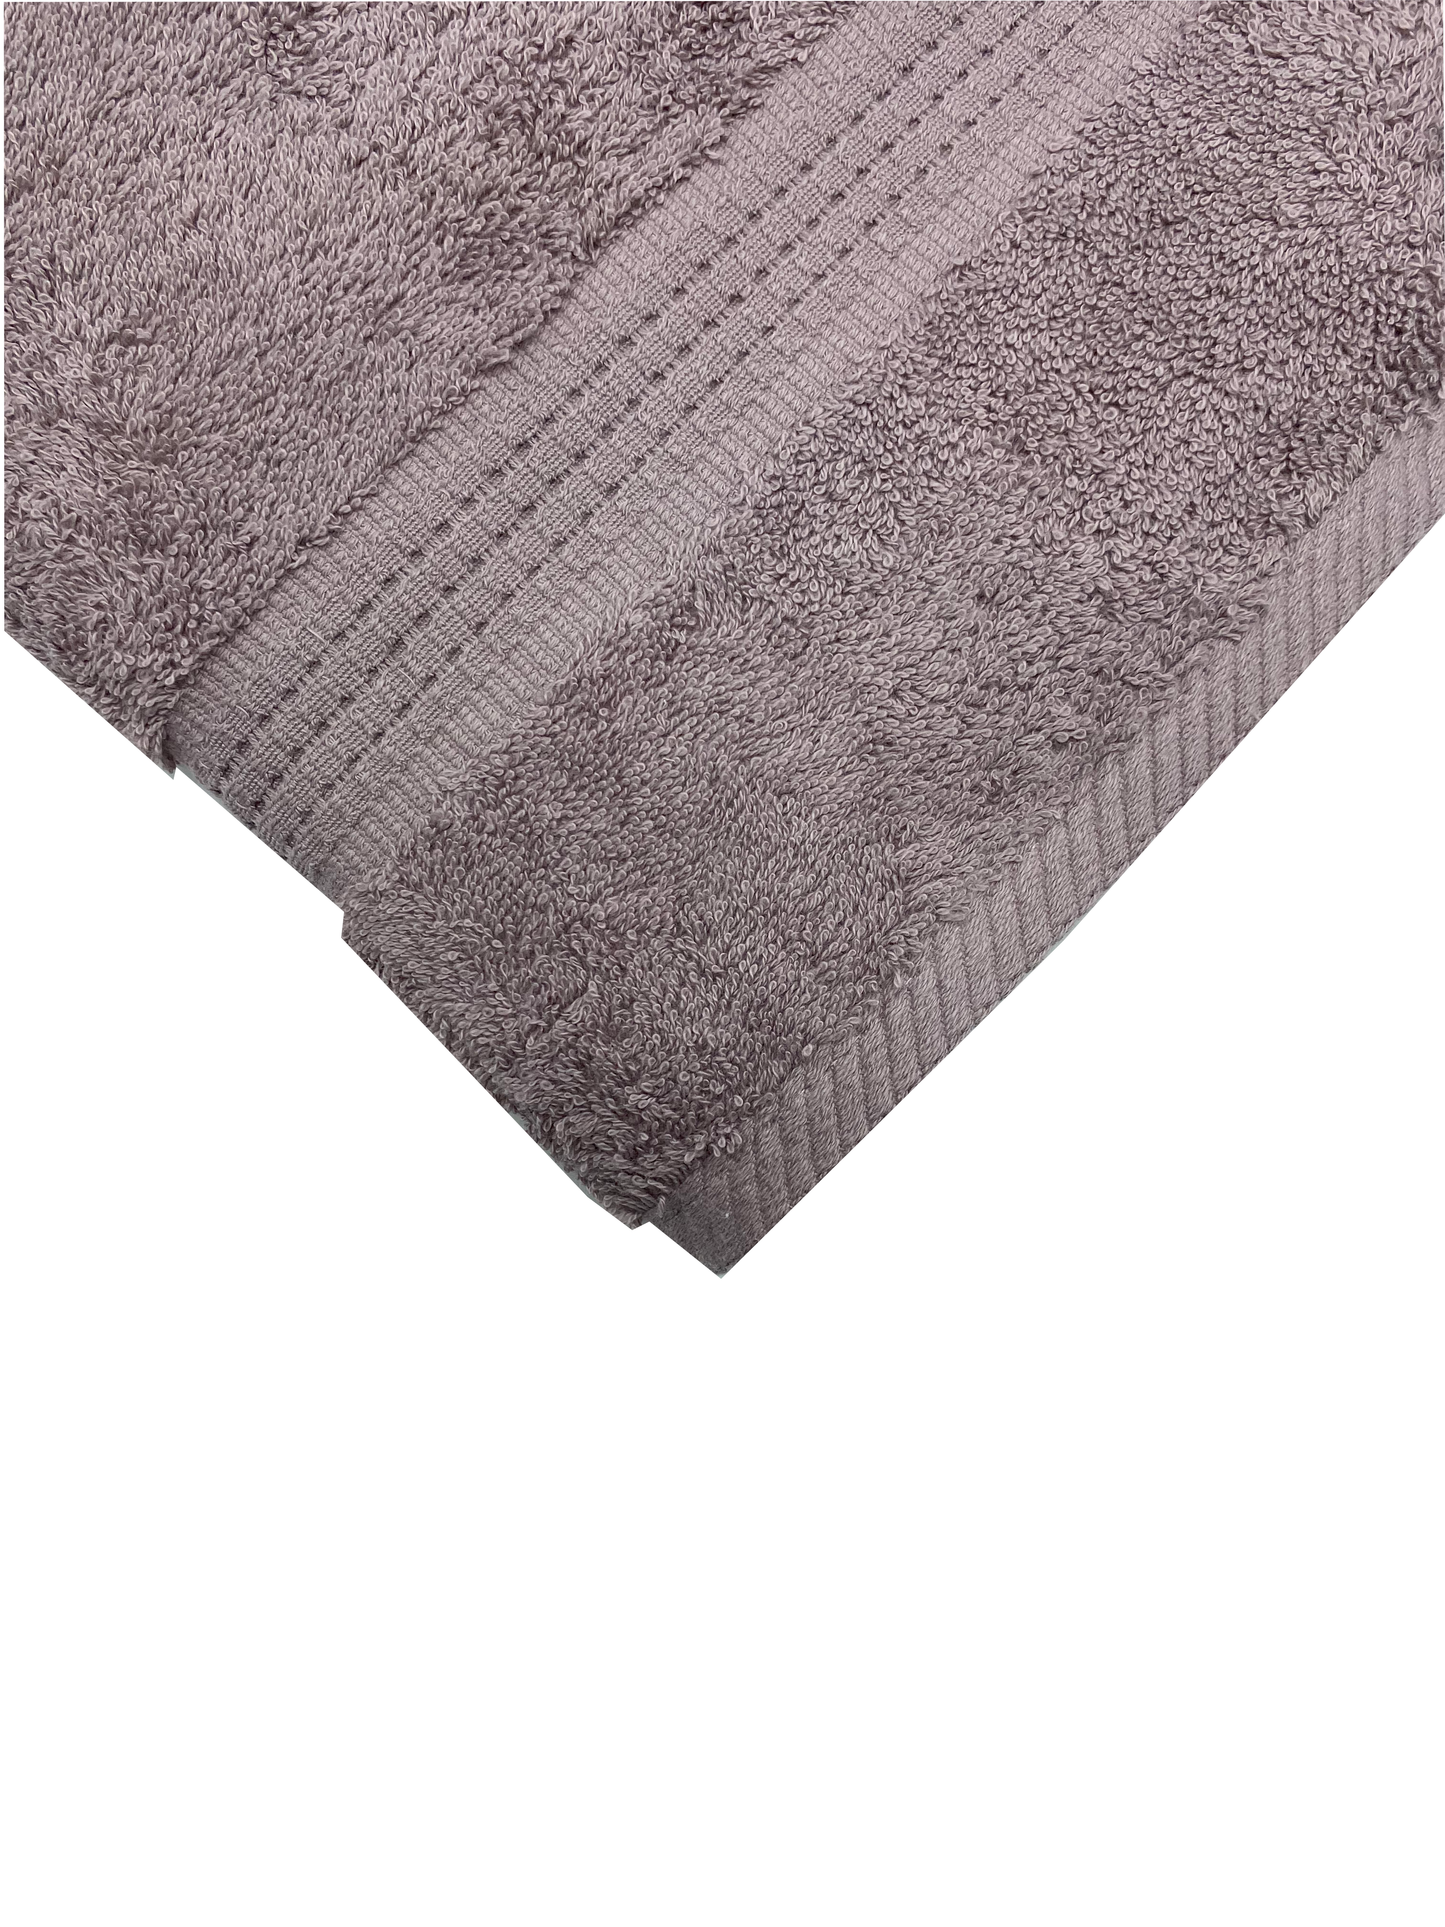 EGYPTIAN COTTON TOWELS